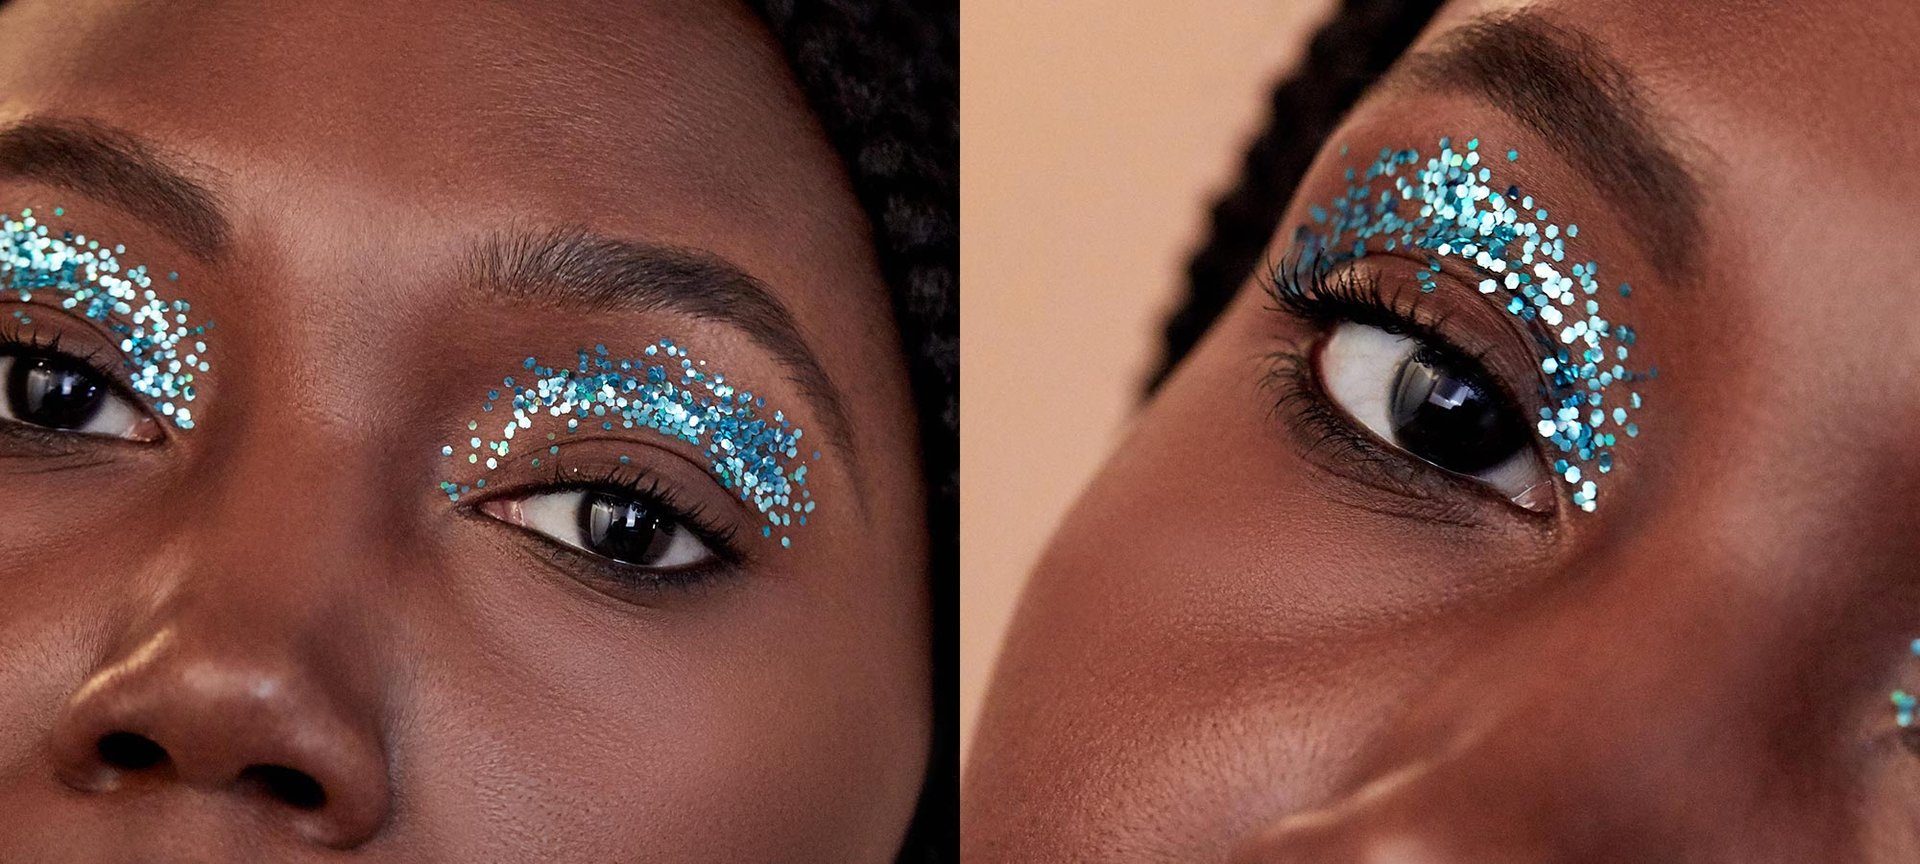 Glitter Makeup That's Easy to Take Off